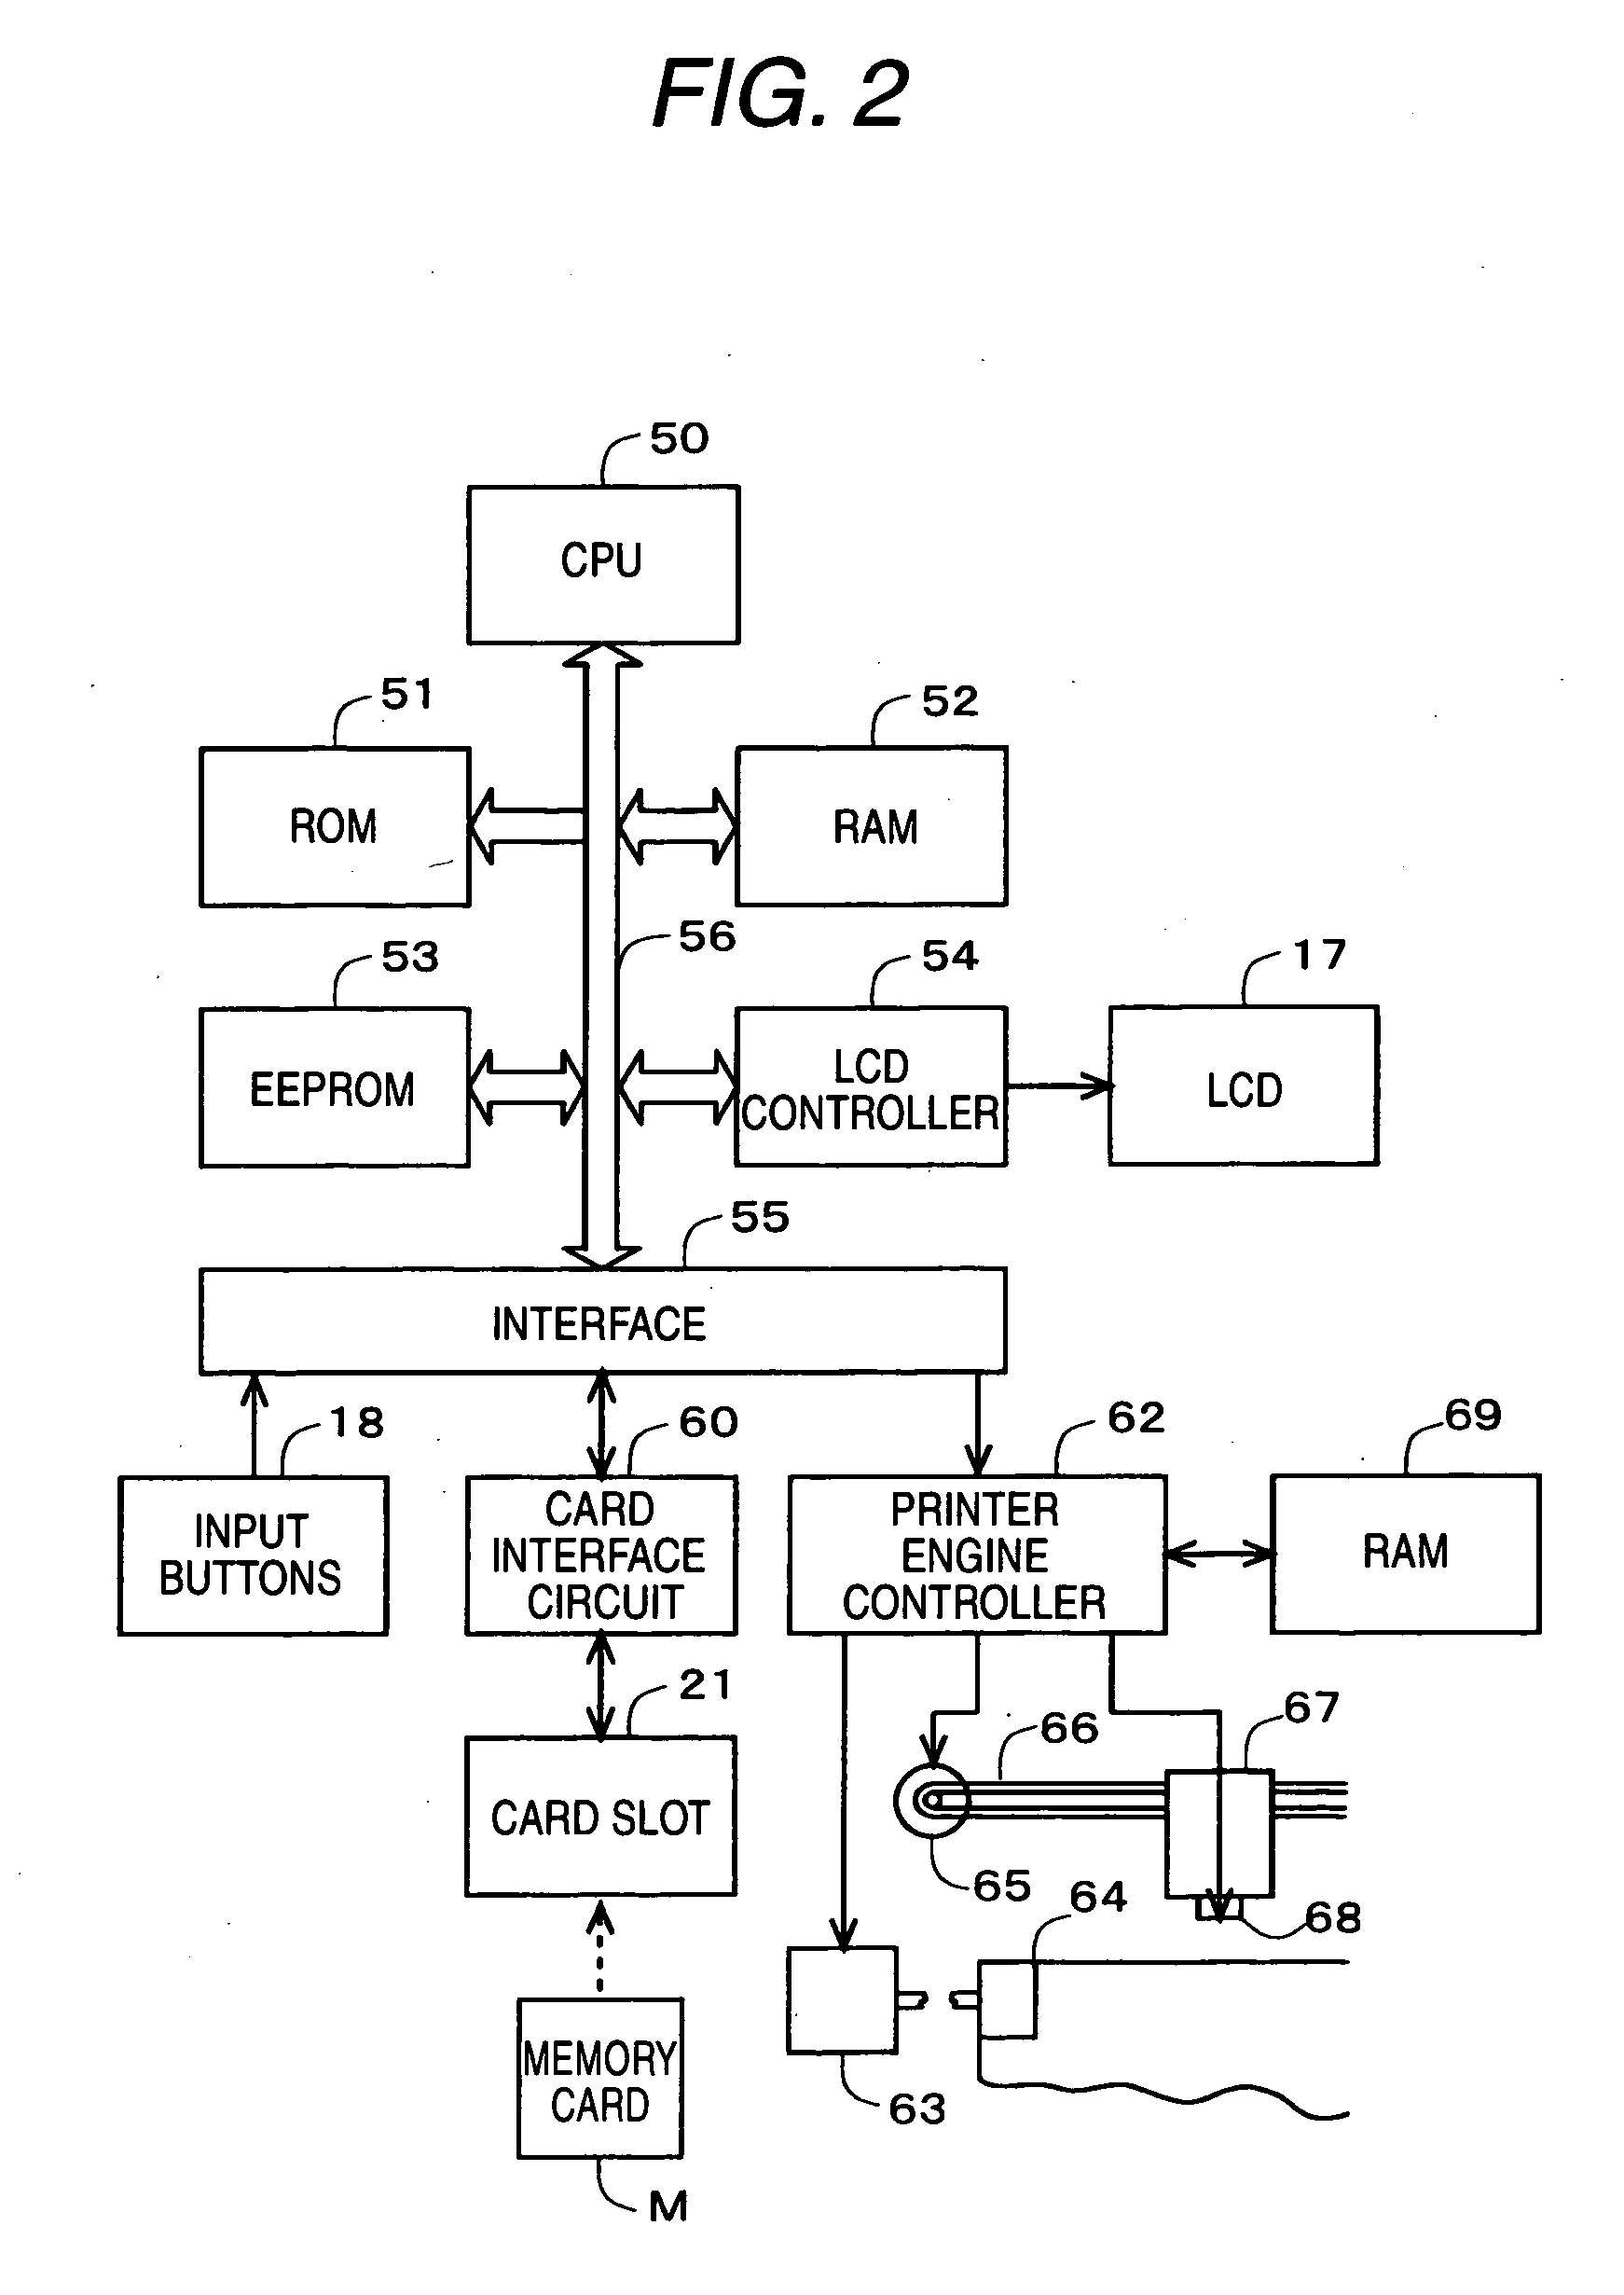 Apparatus and method for printing image